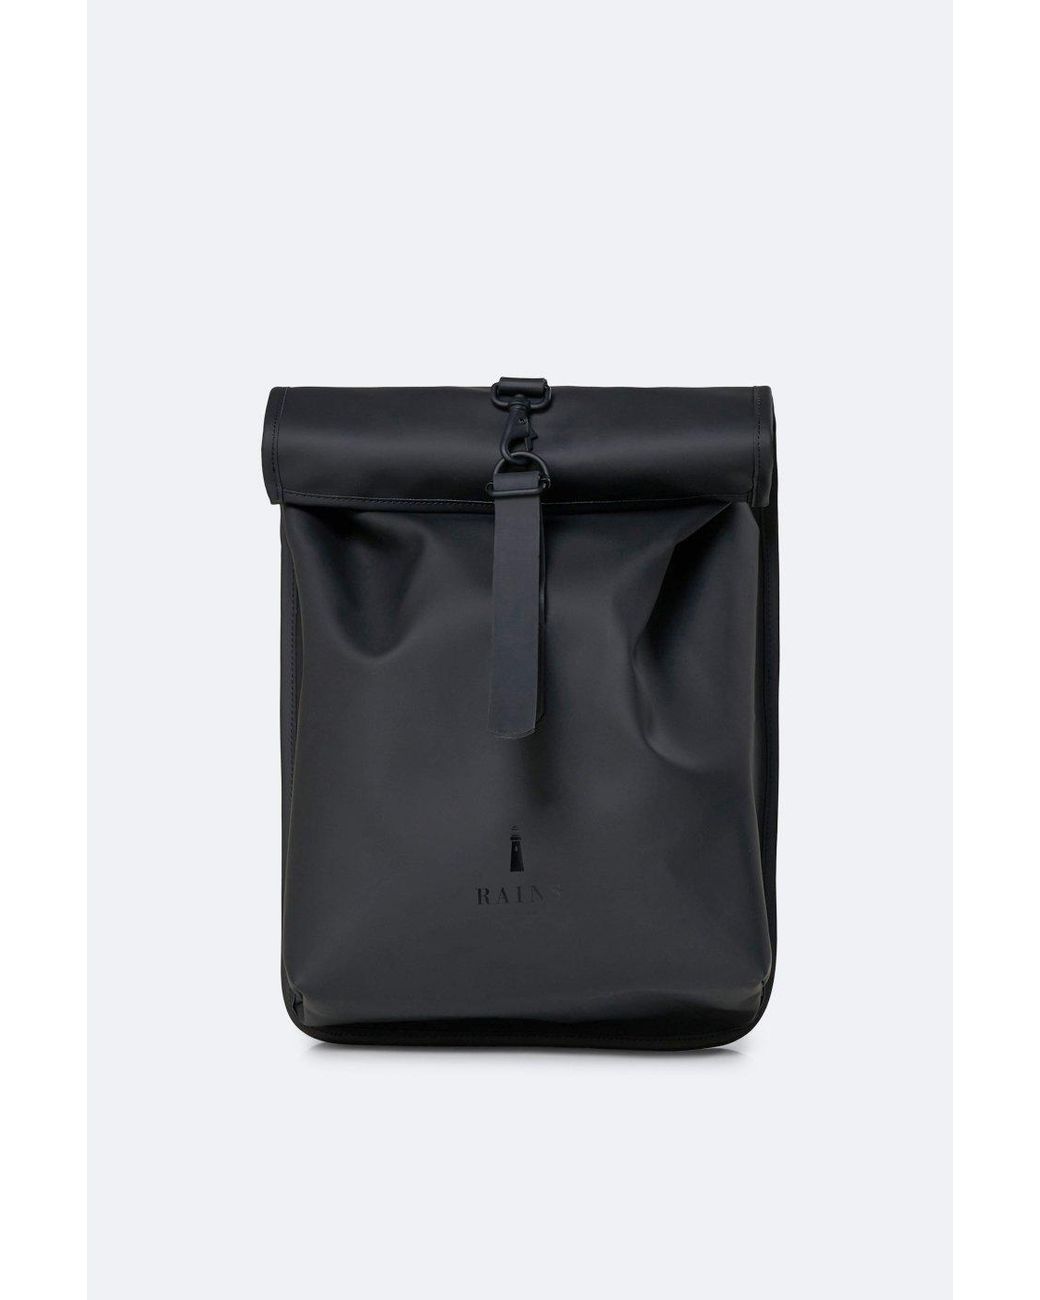 H&m Rolltop Rucksack Flash Sales, UP TO 60% OFF | www.seo.org